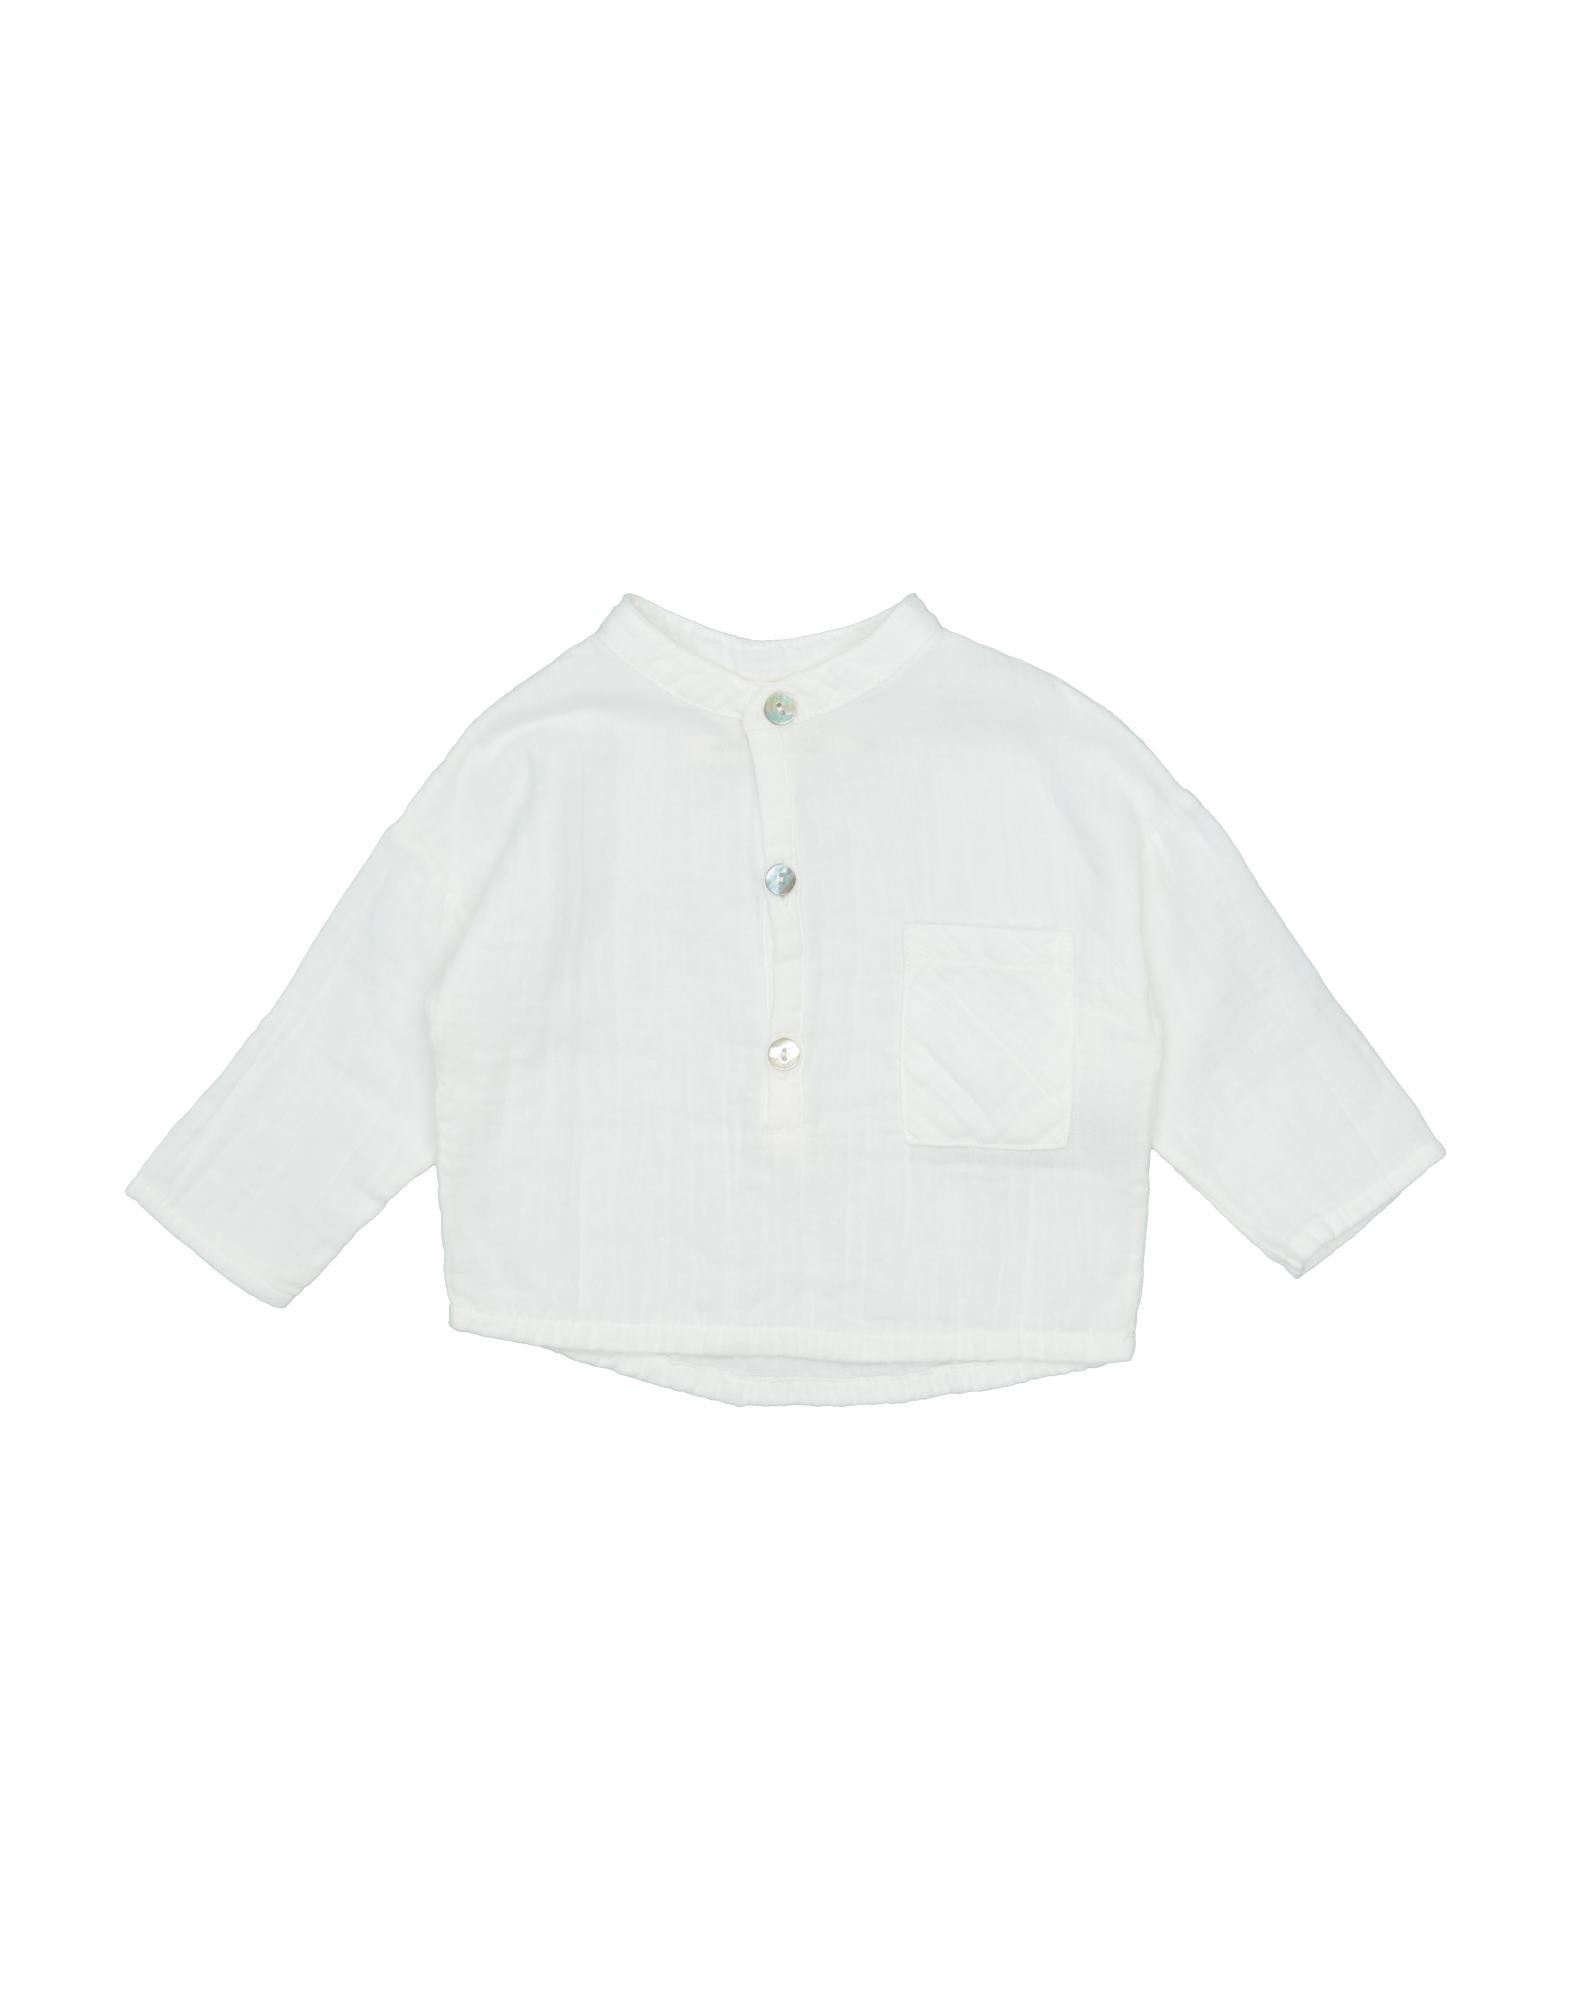 Message In The Bottle Kids'  Shirts In White